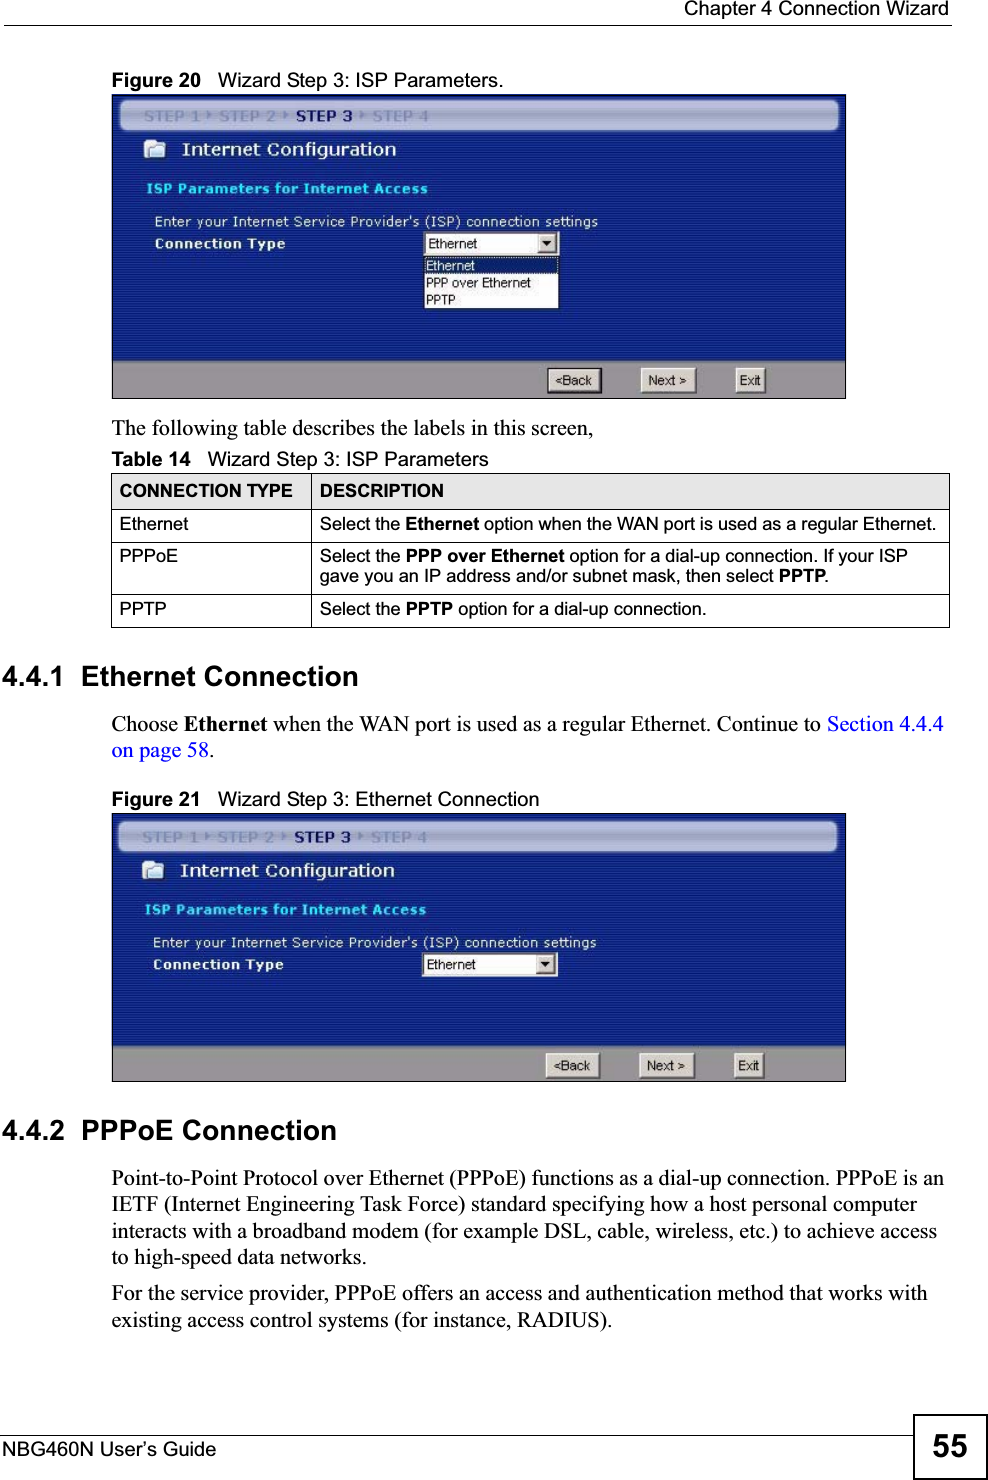  Chapter 4 Connection WizardNBG460N User’s Guide 55Figure 20   Wizard Step 3: ISP Parameters.The following table describes the labels in this screen,4.4.1  Ethernet ConnectionChoose Ethernet when the WAN port is used as a regular Ethernet. Continue to Section 4.4.4 on page 58.Figure 21   Wizard Step 3: Ethernet Connection4.4.2  PPPoE ConnectionPoint-to-Point Protocol over Ethernet (PPPoE) functions as a dial-up connection. PPPoE is an IETF (Internet Engineering Task Force) standard specifying how a host personal computer interacts with a broadband modem (for example DSL, cable, wireless, etc.) to achieve access to high-speed data networks.For the service provider, PPPoE offers an access and authentication method that works with existing access control systems (for instance, RADIUS). Table 14   Wizard Step 3: ISP ParametersCONNECTION TYPE DESCRIPTIONEthernet Select the Ethernet option when the WAN port is used as a regular Ethernet. PPPoE Select the PPP over Ethernet option for a dial-up connection. If your ISP gave you an IP address and/or subnet mask, then select PPTP.PPTP Select the PPTP option for a dial-up connection.